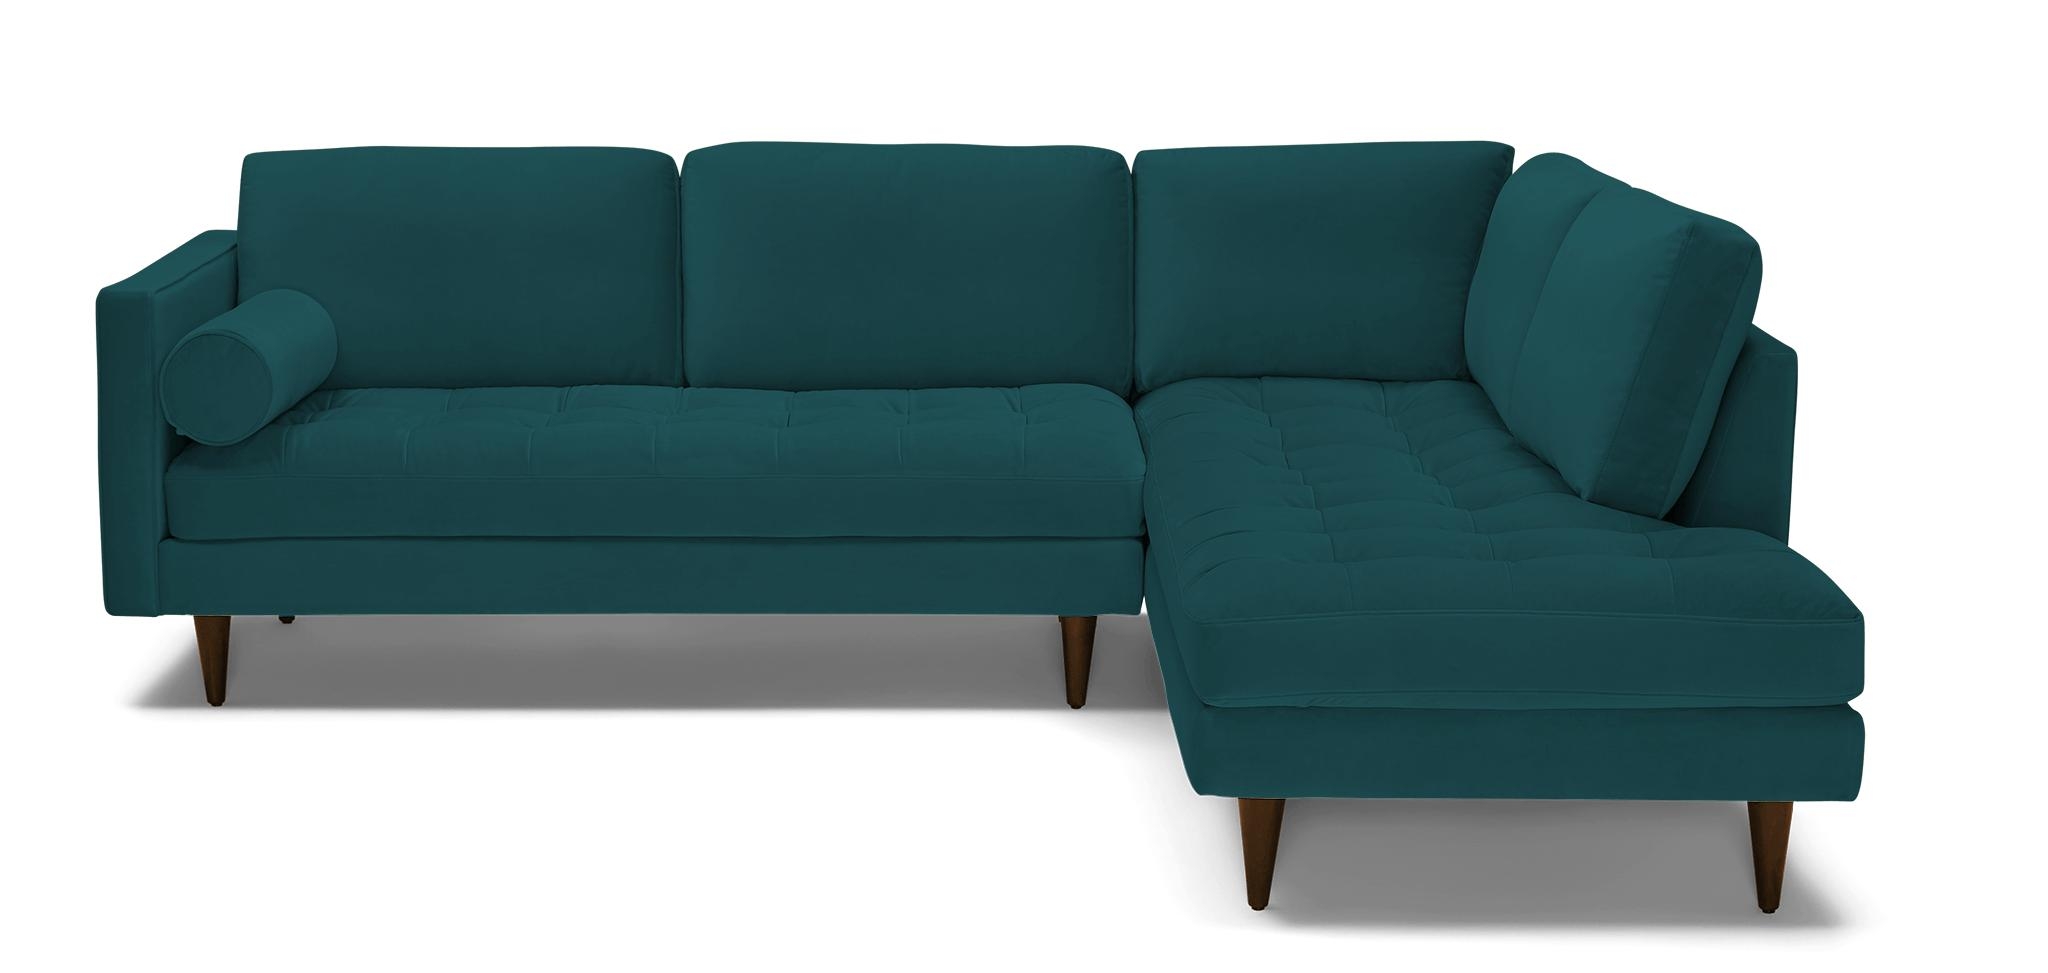 Blue Briar Mid Century Modern Sectional with Bumper - Royale Peacock - Mocha - Left - Image 1